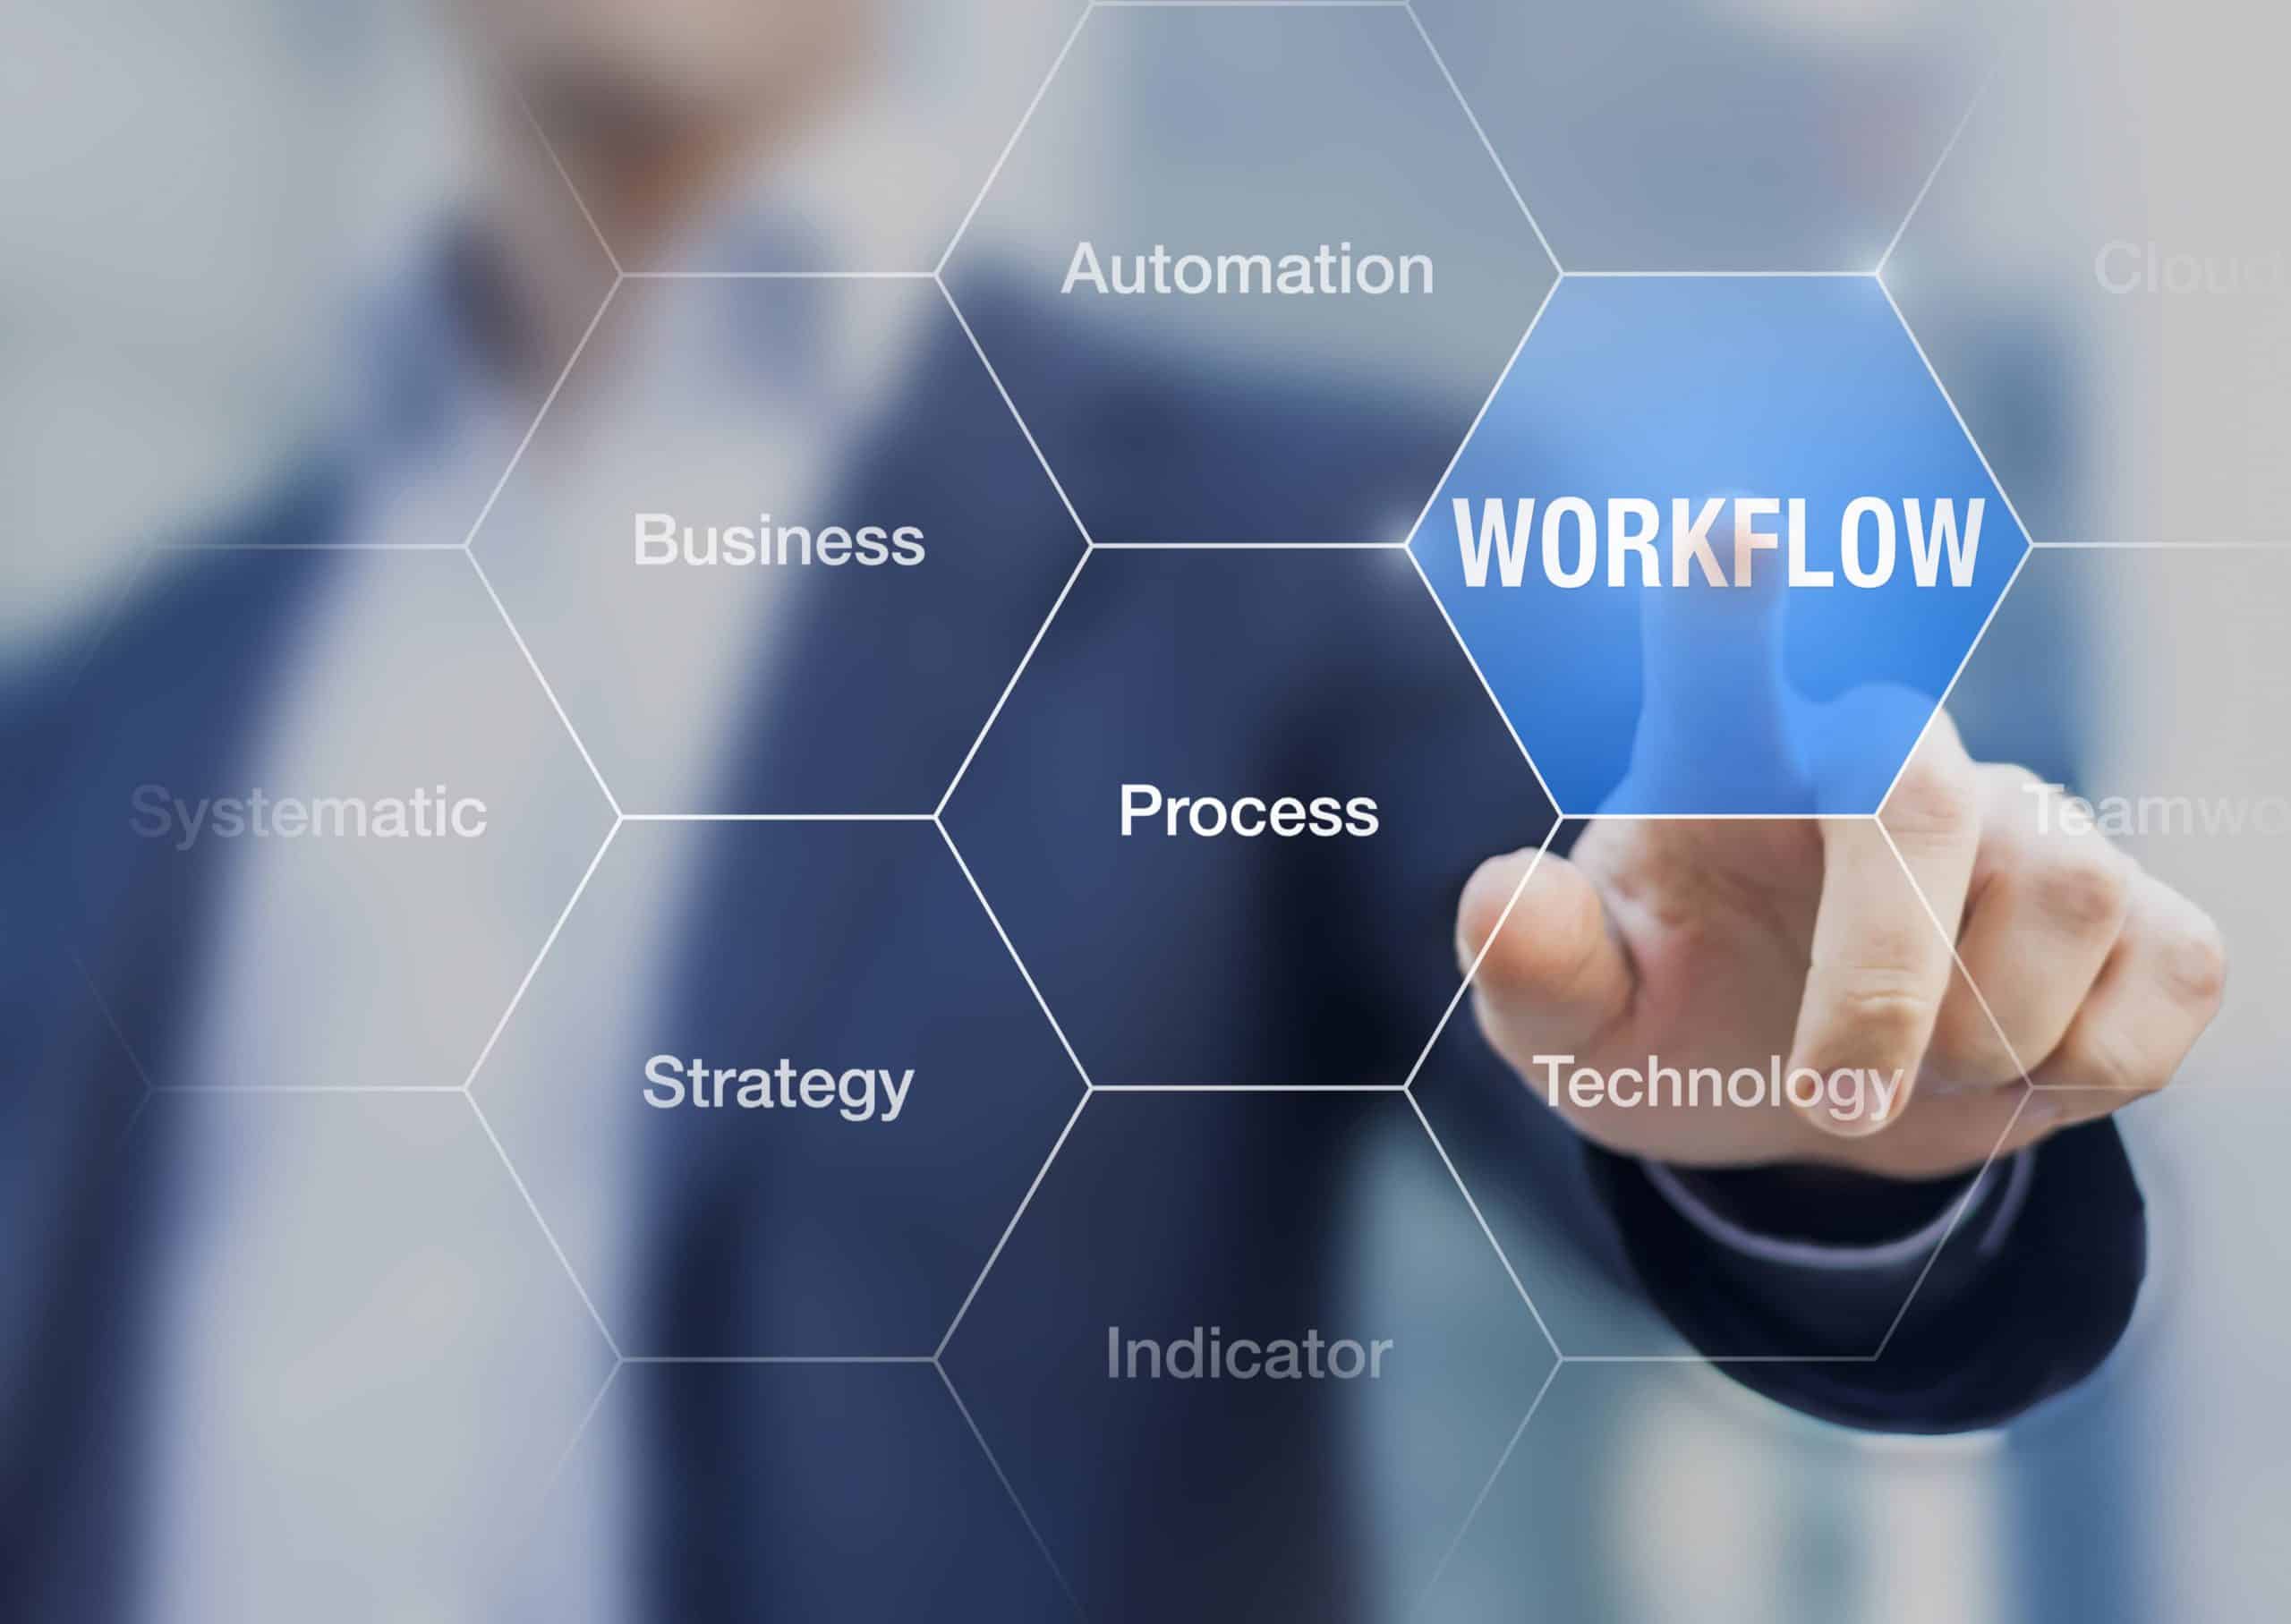 You are currently viewing 3 Benefits Of Automating Estate Workflows.